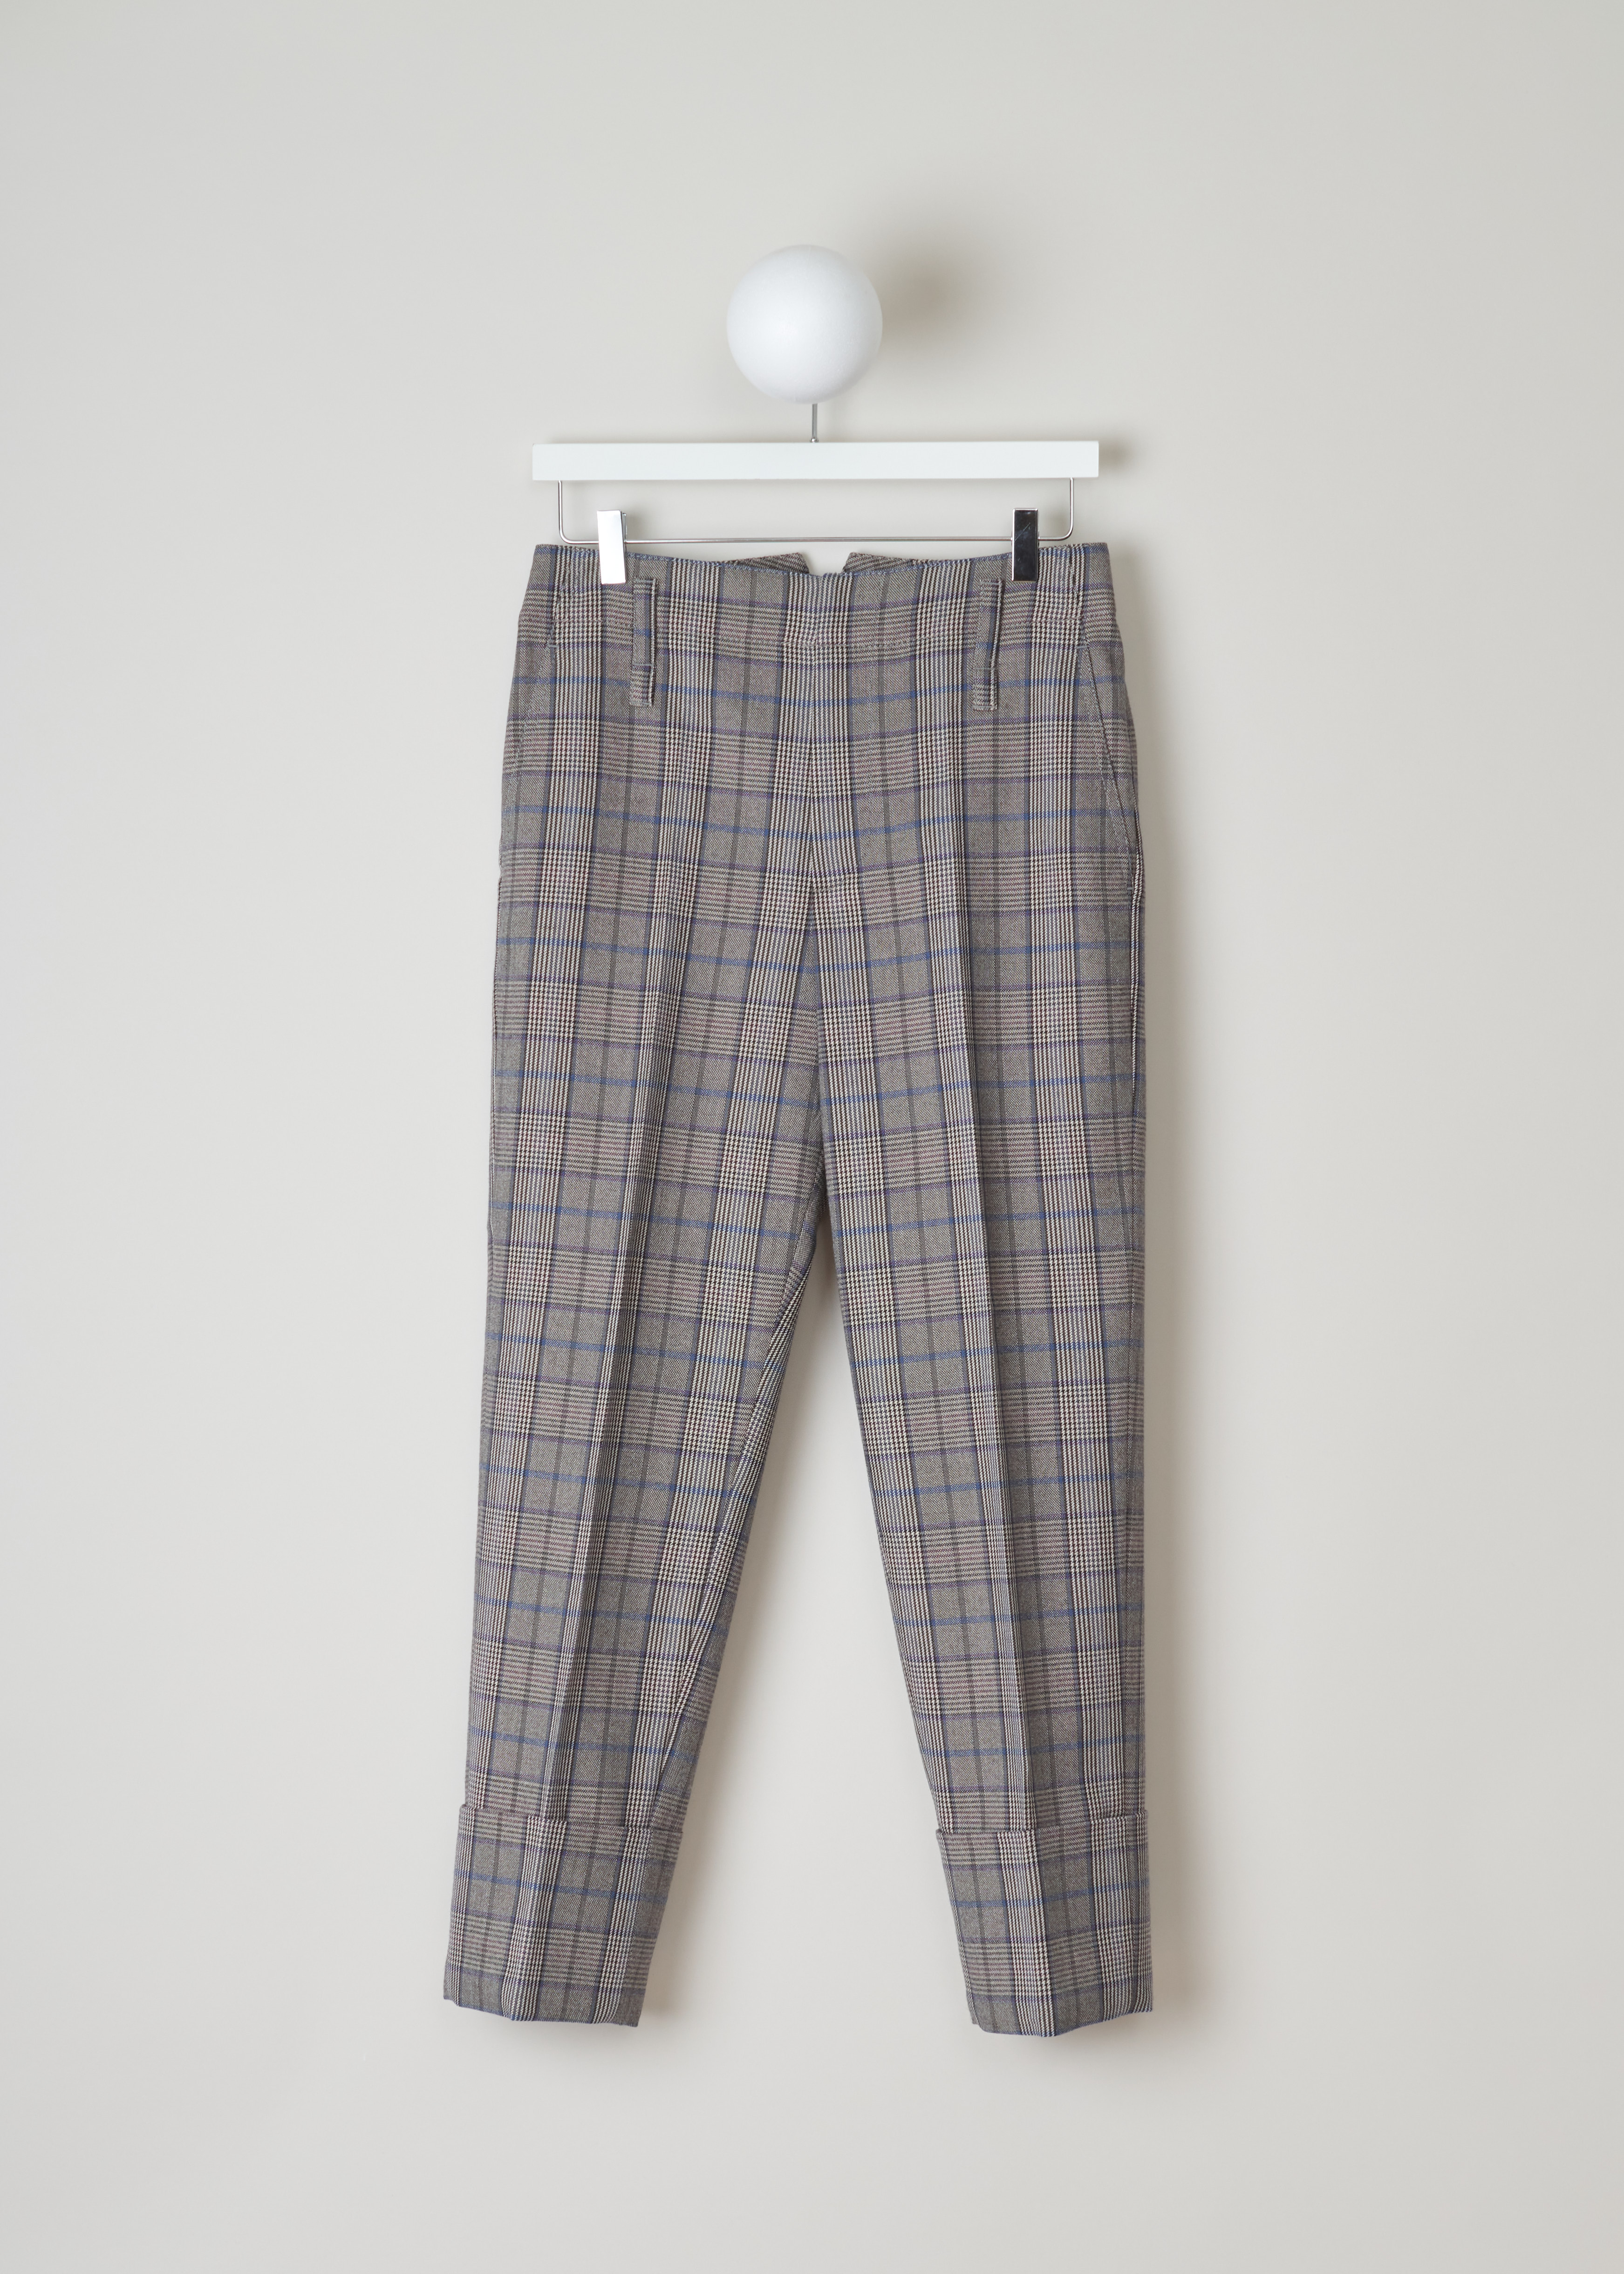 Brunello Cucinelli Brown purple blue checked pants, MB519P7027_C2547 brown front. These plaid wool pants in brown, with hints of purple and blue. Has cropped legs with a turn-up. Belt loops at the waistband. Two slant pockets on the front and two welt pockets on the back.